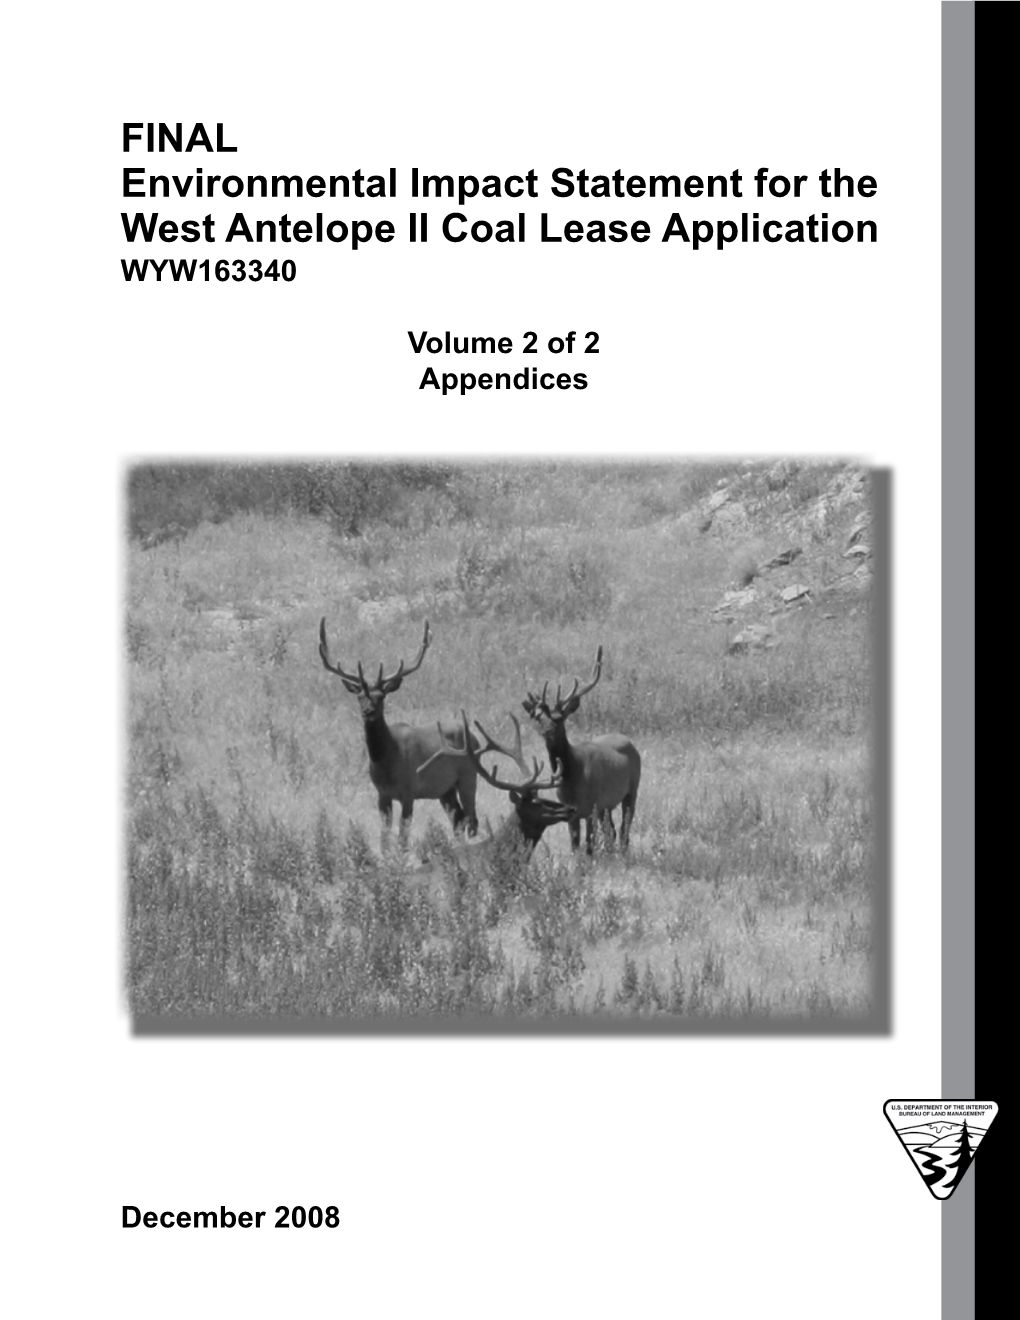 FINAL Environmental Impact Statement for the West Antelope II Coal Lease Application WYW163340